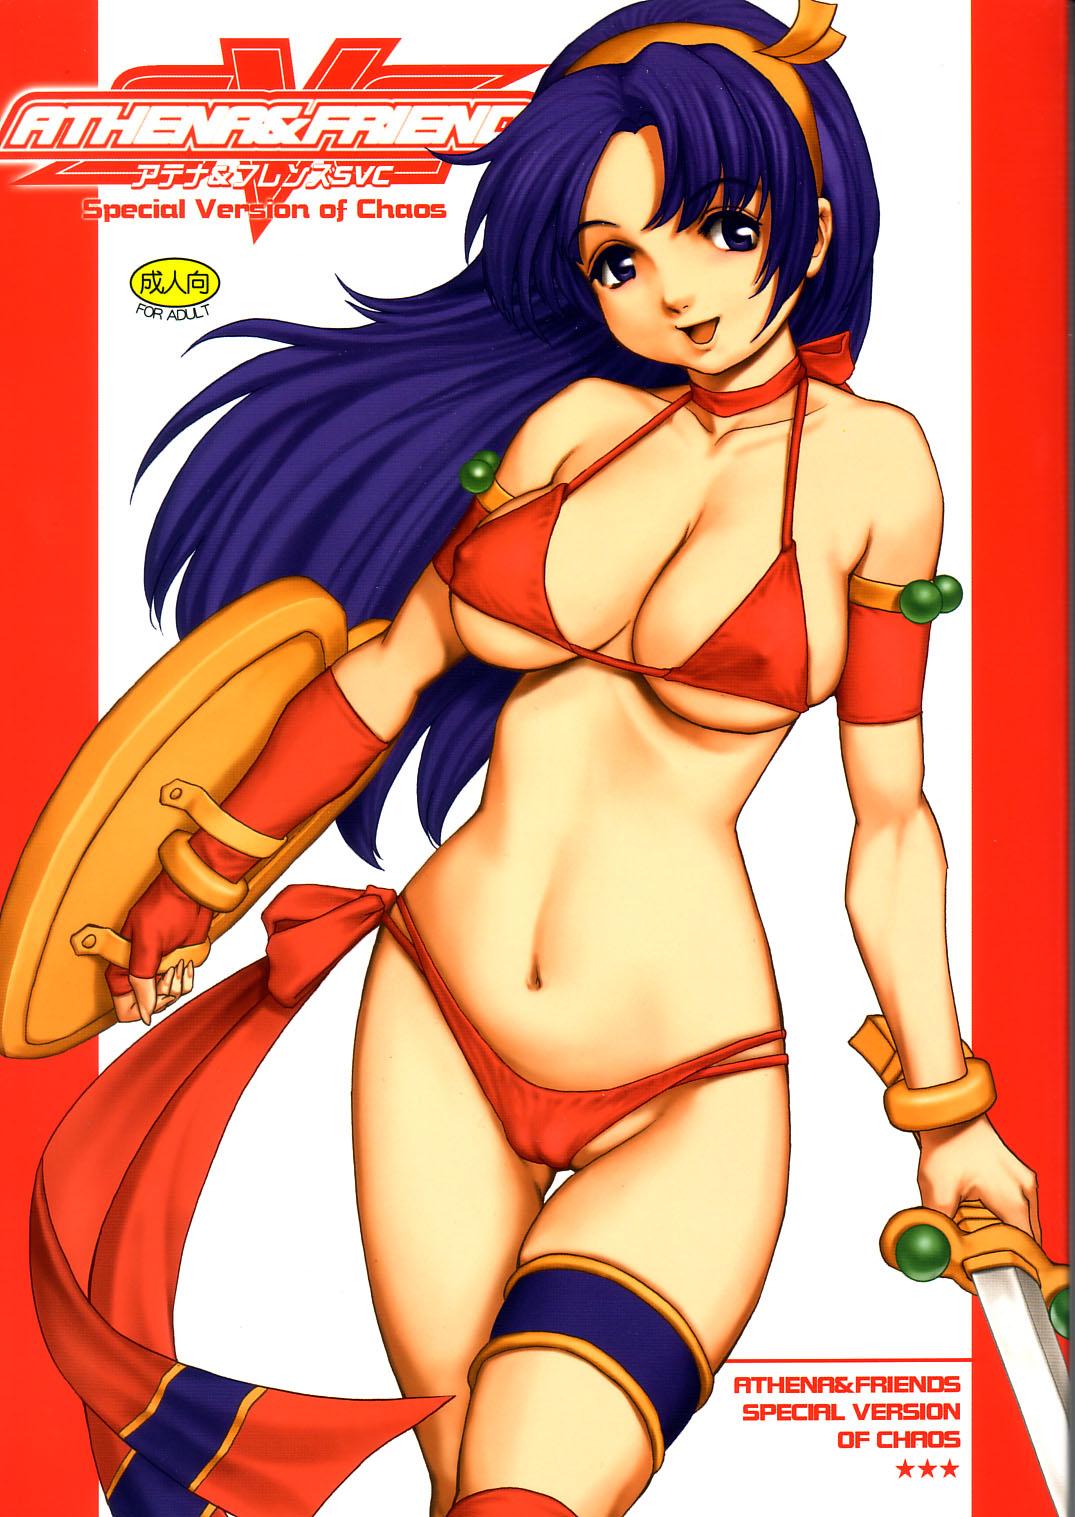 Goth Athena & Friends SVC - King of fighters Final fight Corrida - Picture 1